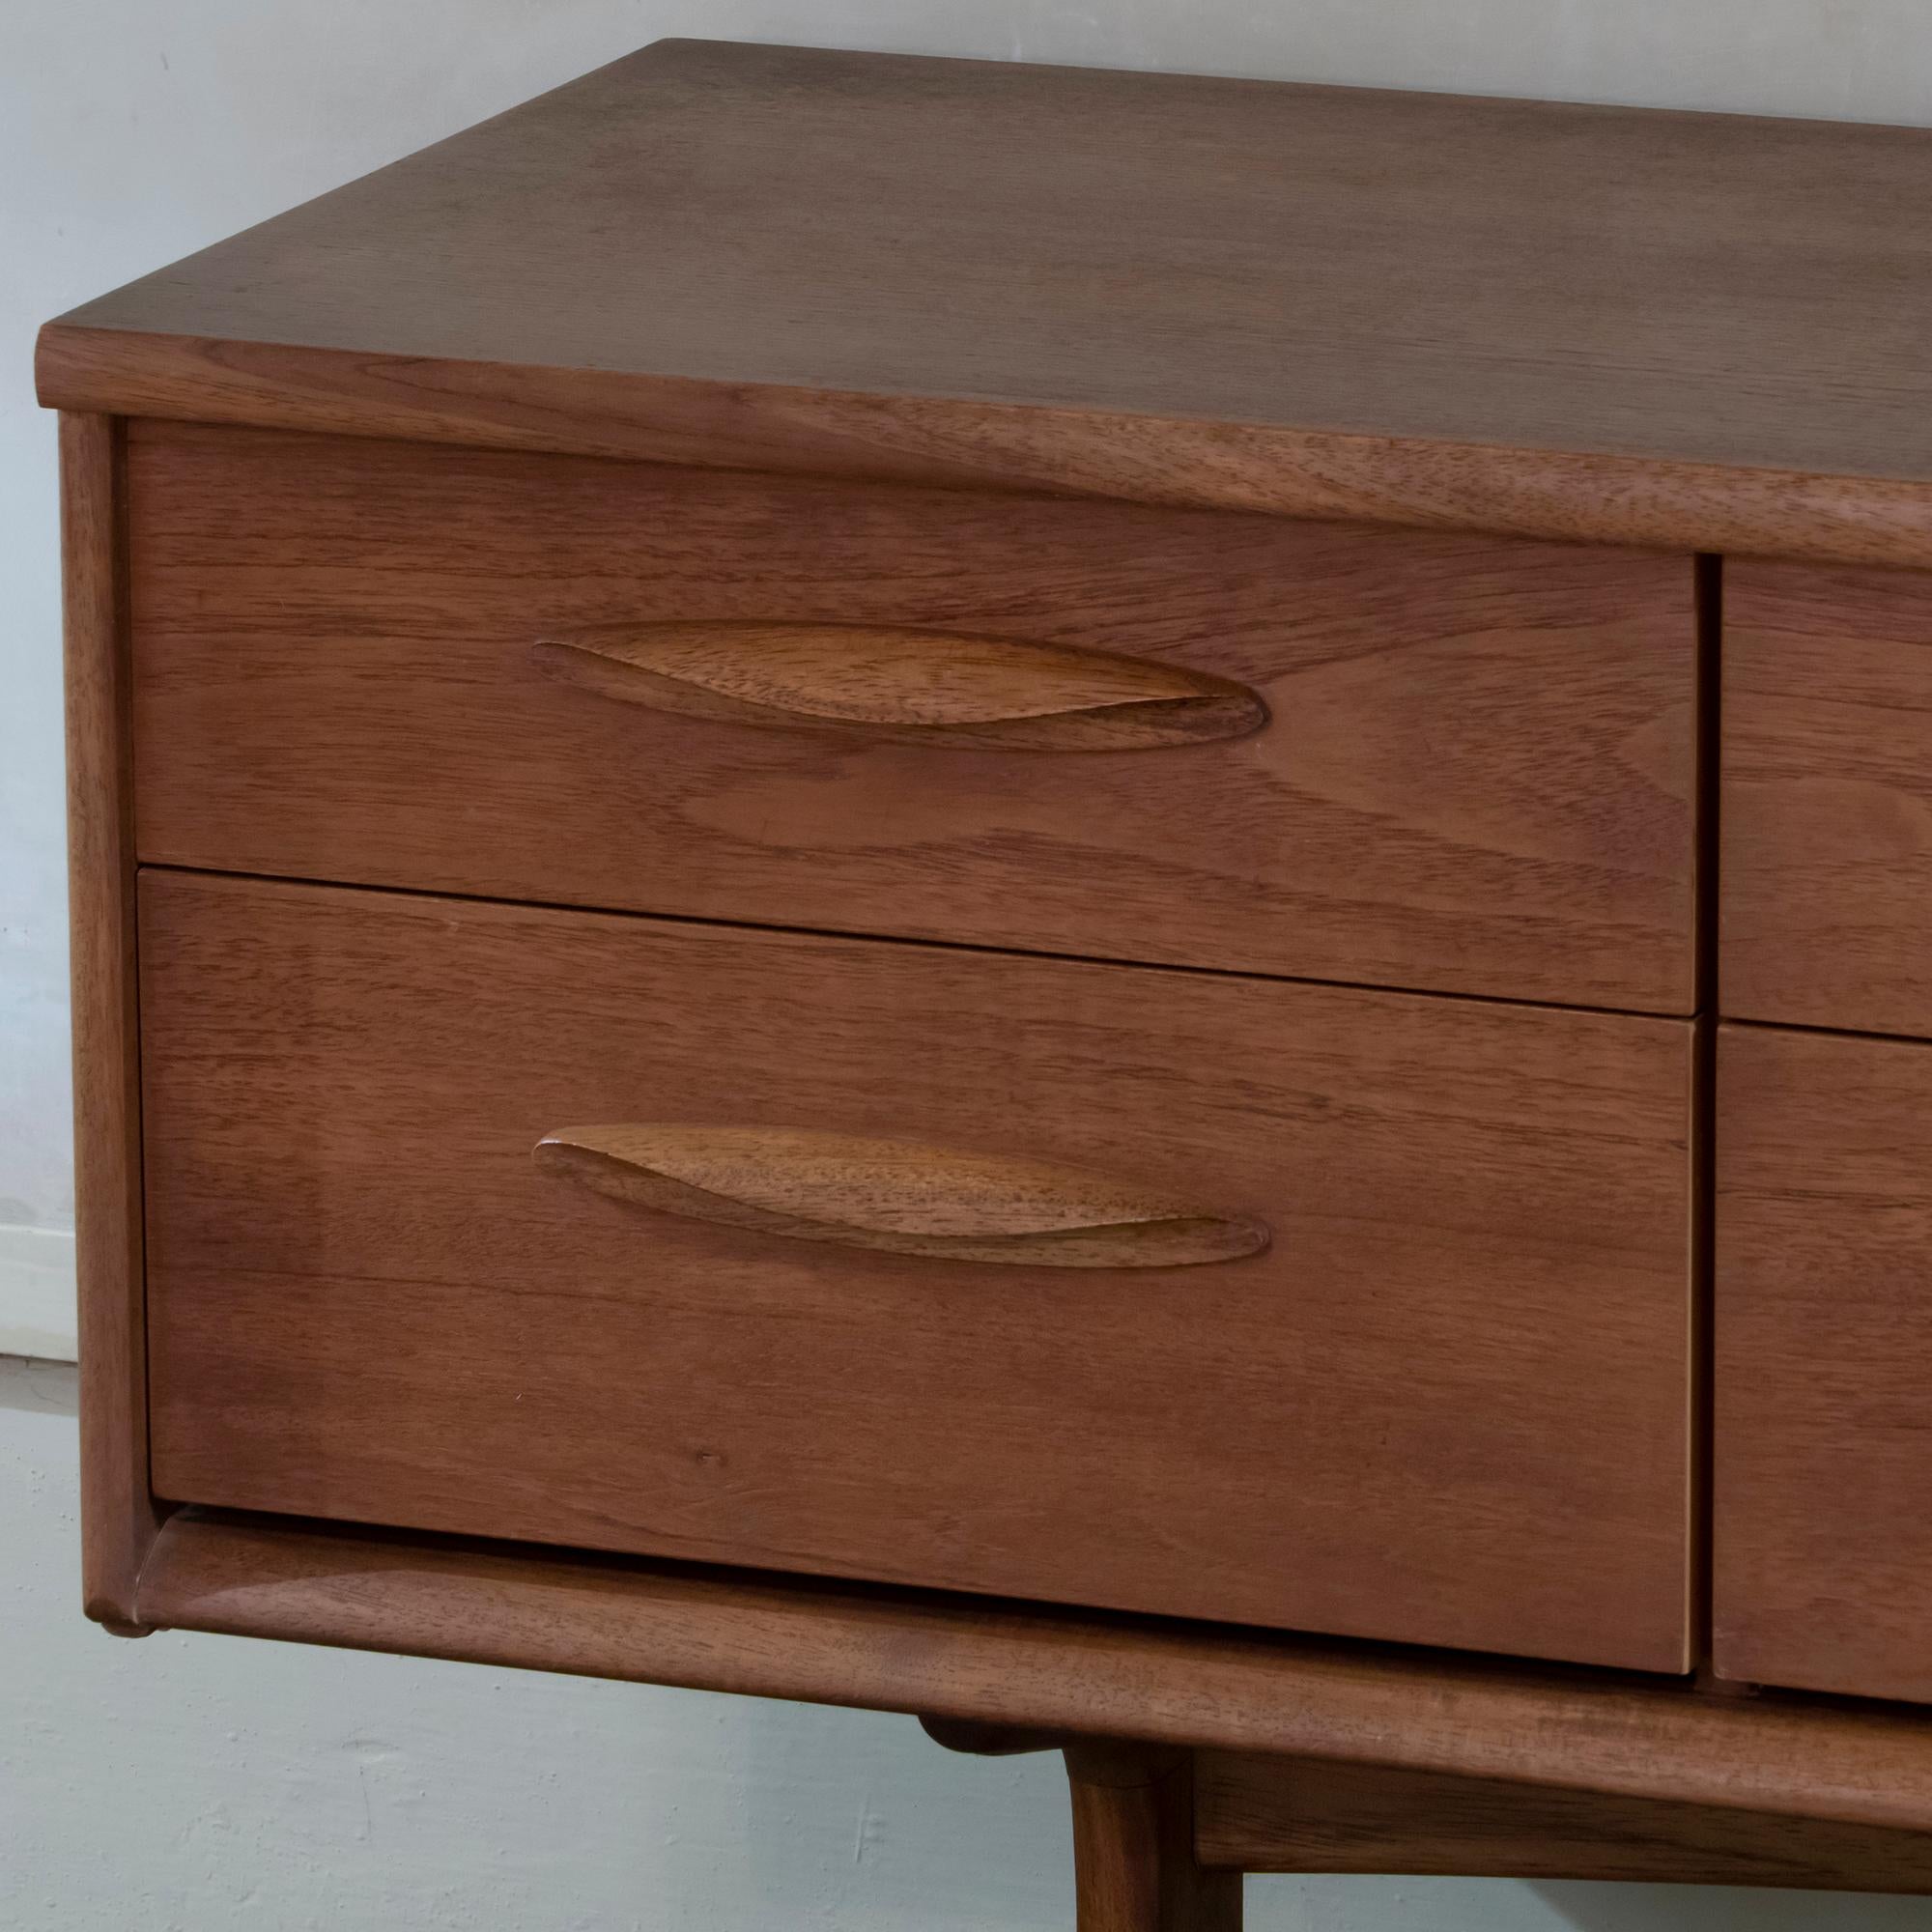 1960s English Teak Chest of Drawers by Austin Suite Ltd For Sale 2